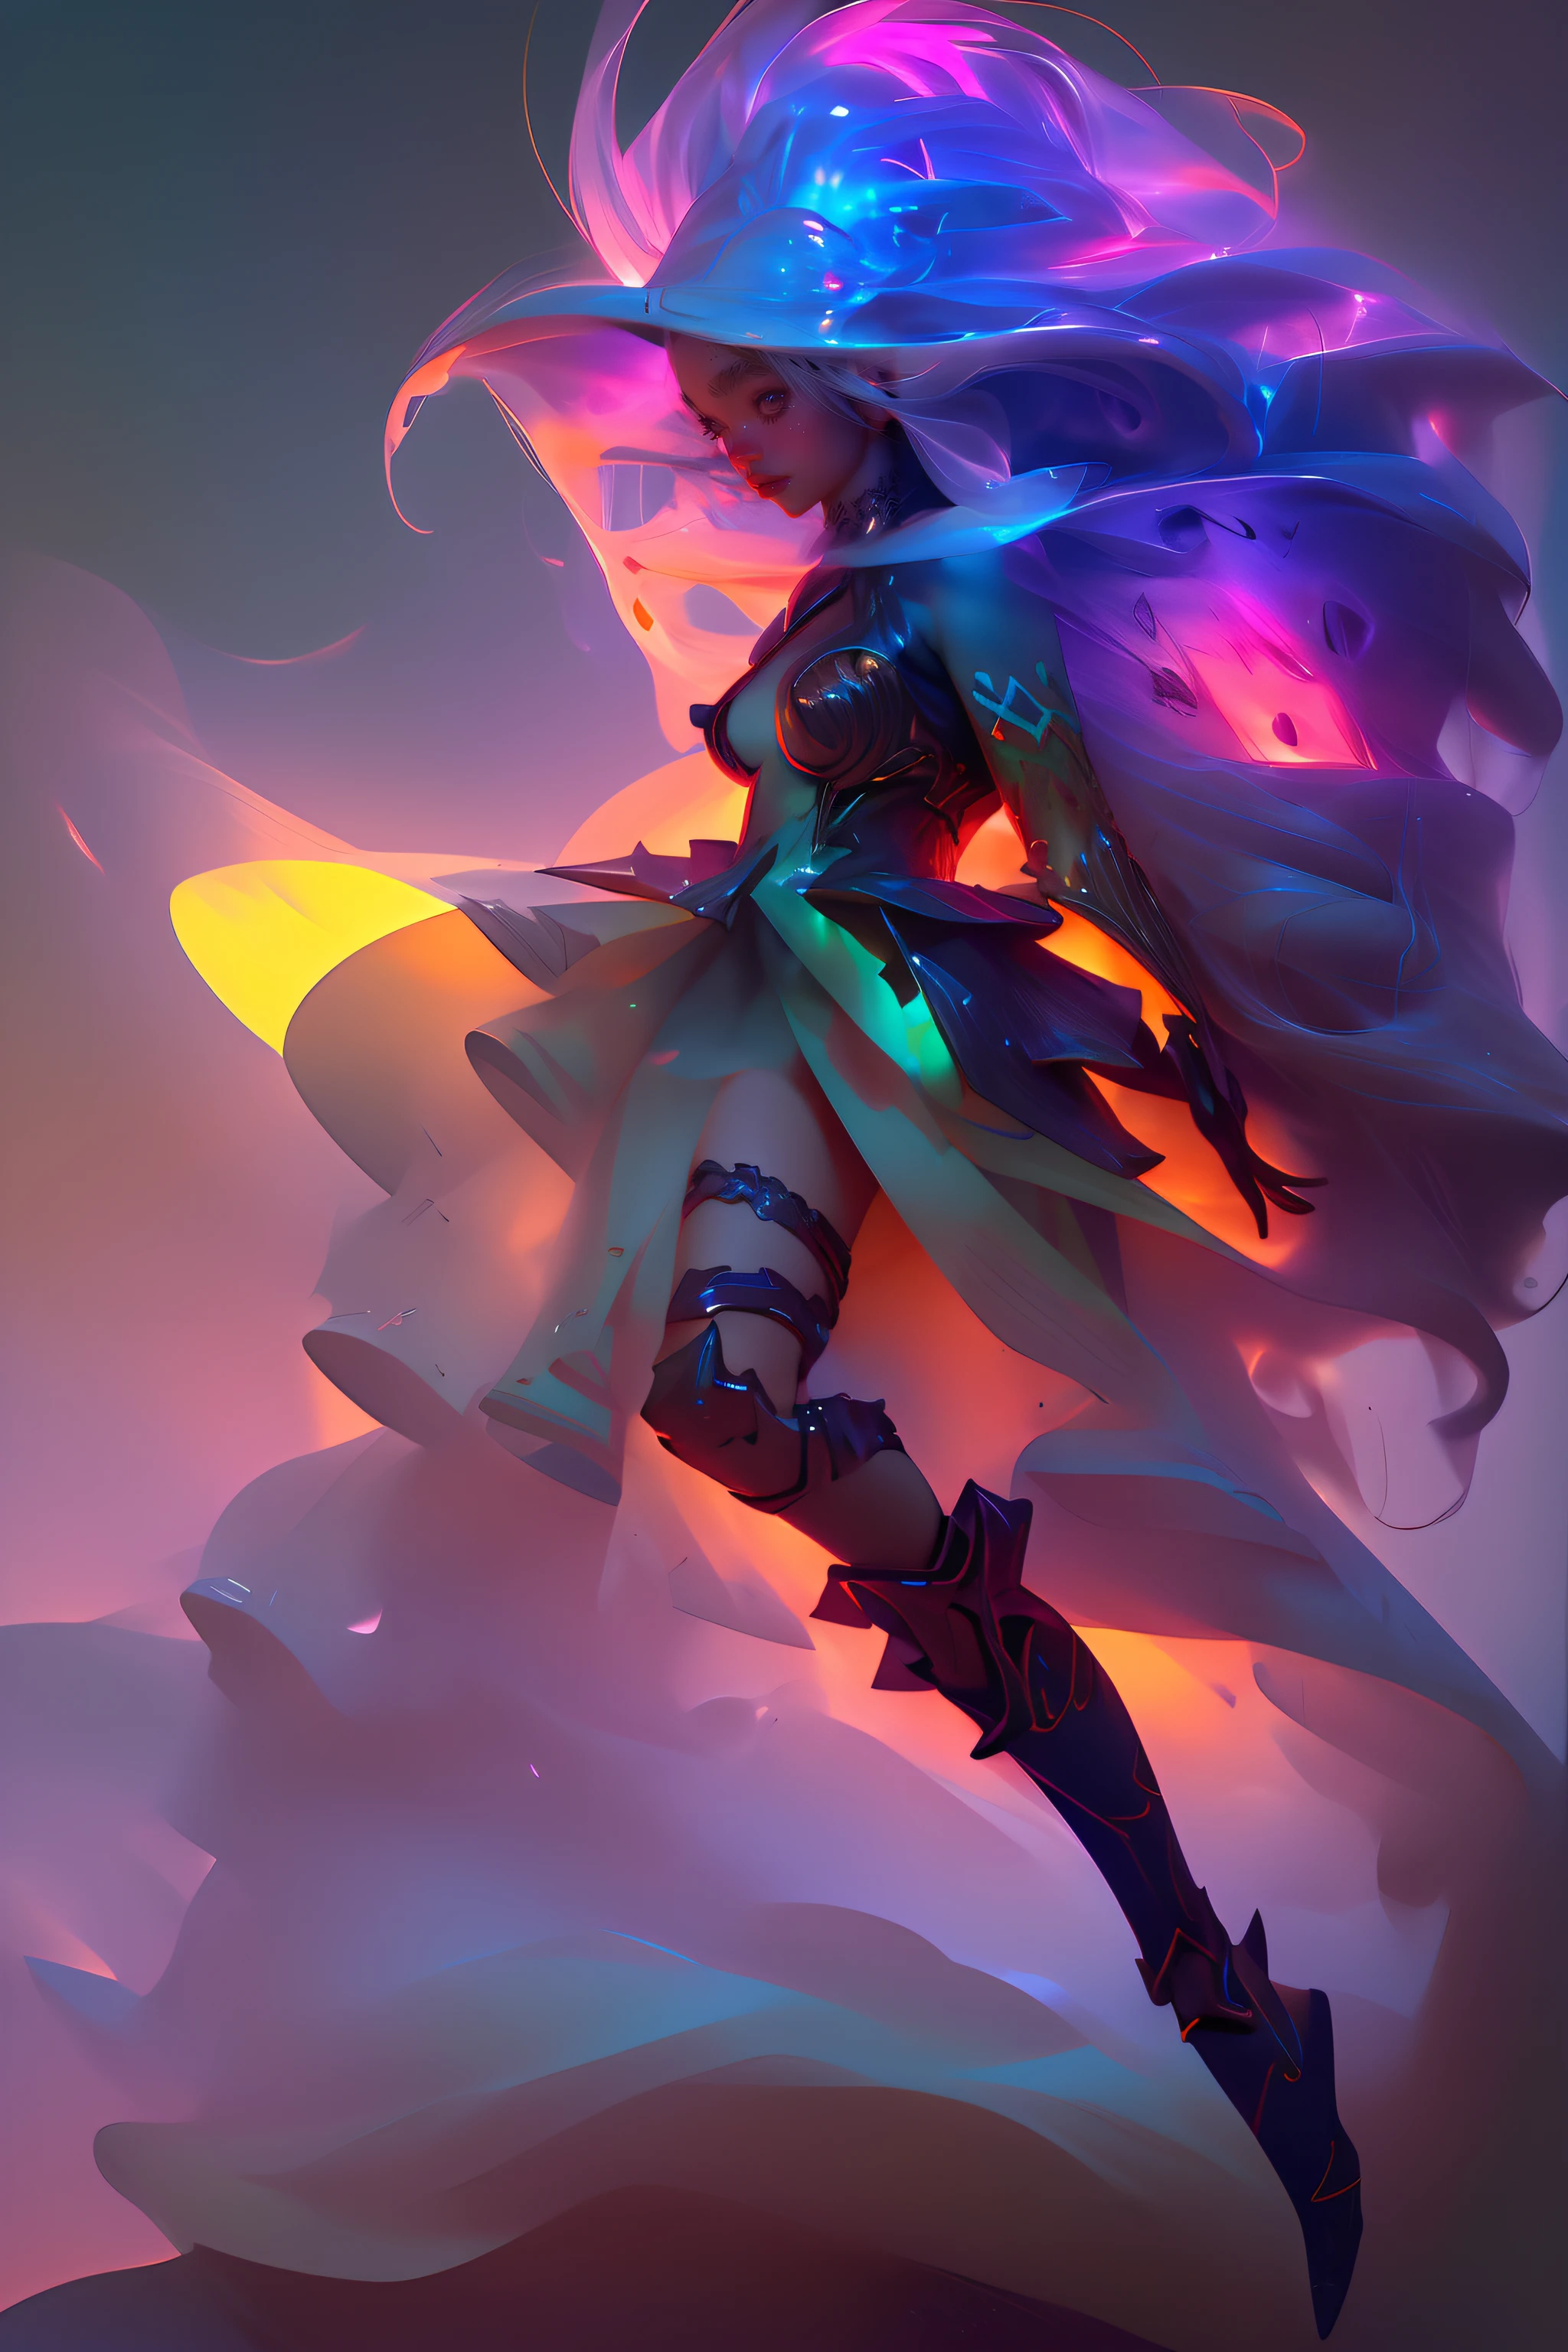 Elf Knight, (floating_long_hair:1.3), (detailed eyes:1.5), beauty face, cool vibe, fashion_model_pose, glowing glyphs, graphite, gold, unique, reflection, detailed texture, detailed pattern, (glowing aura:1.2), fantasy, fantastic, sharp, rainbow crystals, storm aura, floating:1.4, ((purple aura, green aura)), shine:1.3, (((looking viewer))), perfect anatomy, (tall body, beauty body), (chuppy body:1.4), (big_boobs:1.3), badass_girl, ((revealing clothes)), nijistyle, green_glowing, full_body, Golden+Purle clothes, stylish, (masterpiece:1.2), (best quality), 4k, ultra-detailed, (dynamic composition: 1.4), layout art, (luminous lighting, atmospheric lighting), Final Fantasy style, magical, ((glove full hands)), fran, viera, helmet, revealing clothes, vambraces, armored legwear, high heels, (((perfect_anatomy:1.4))